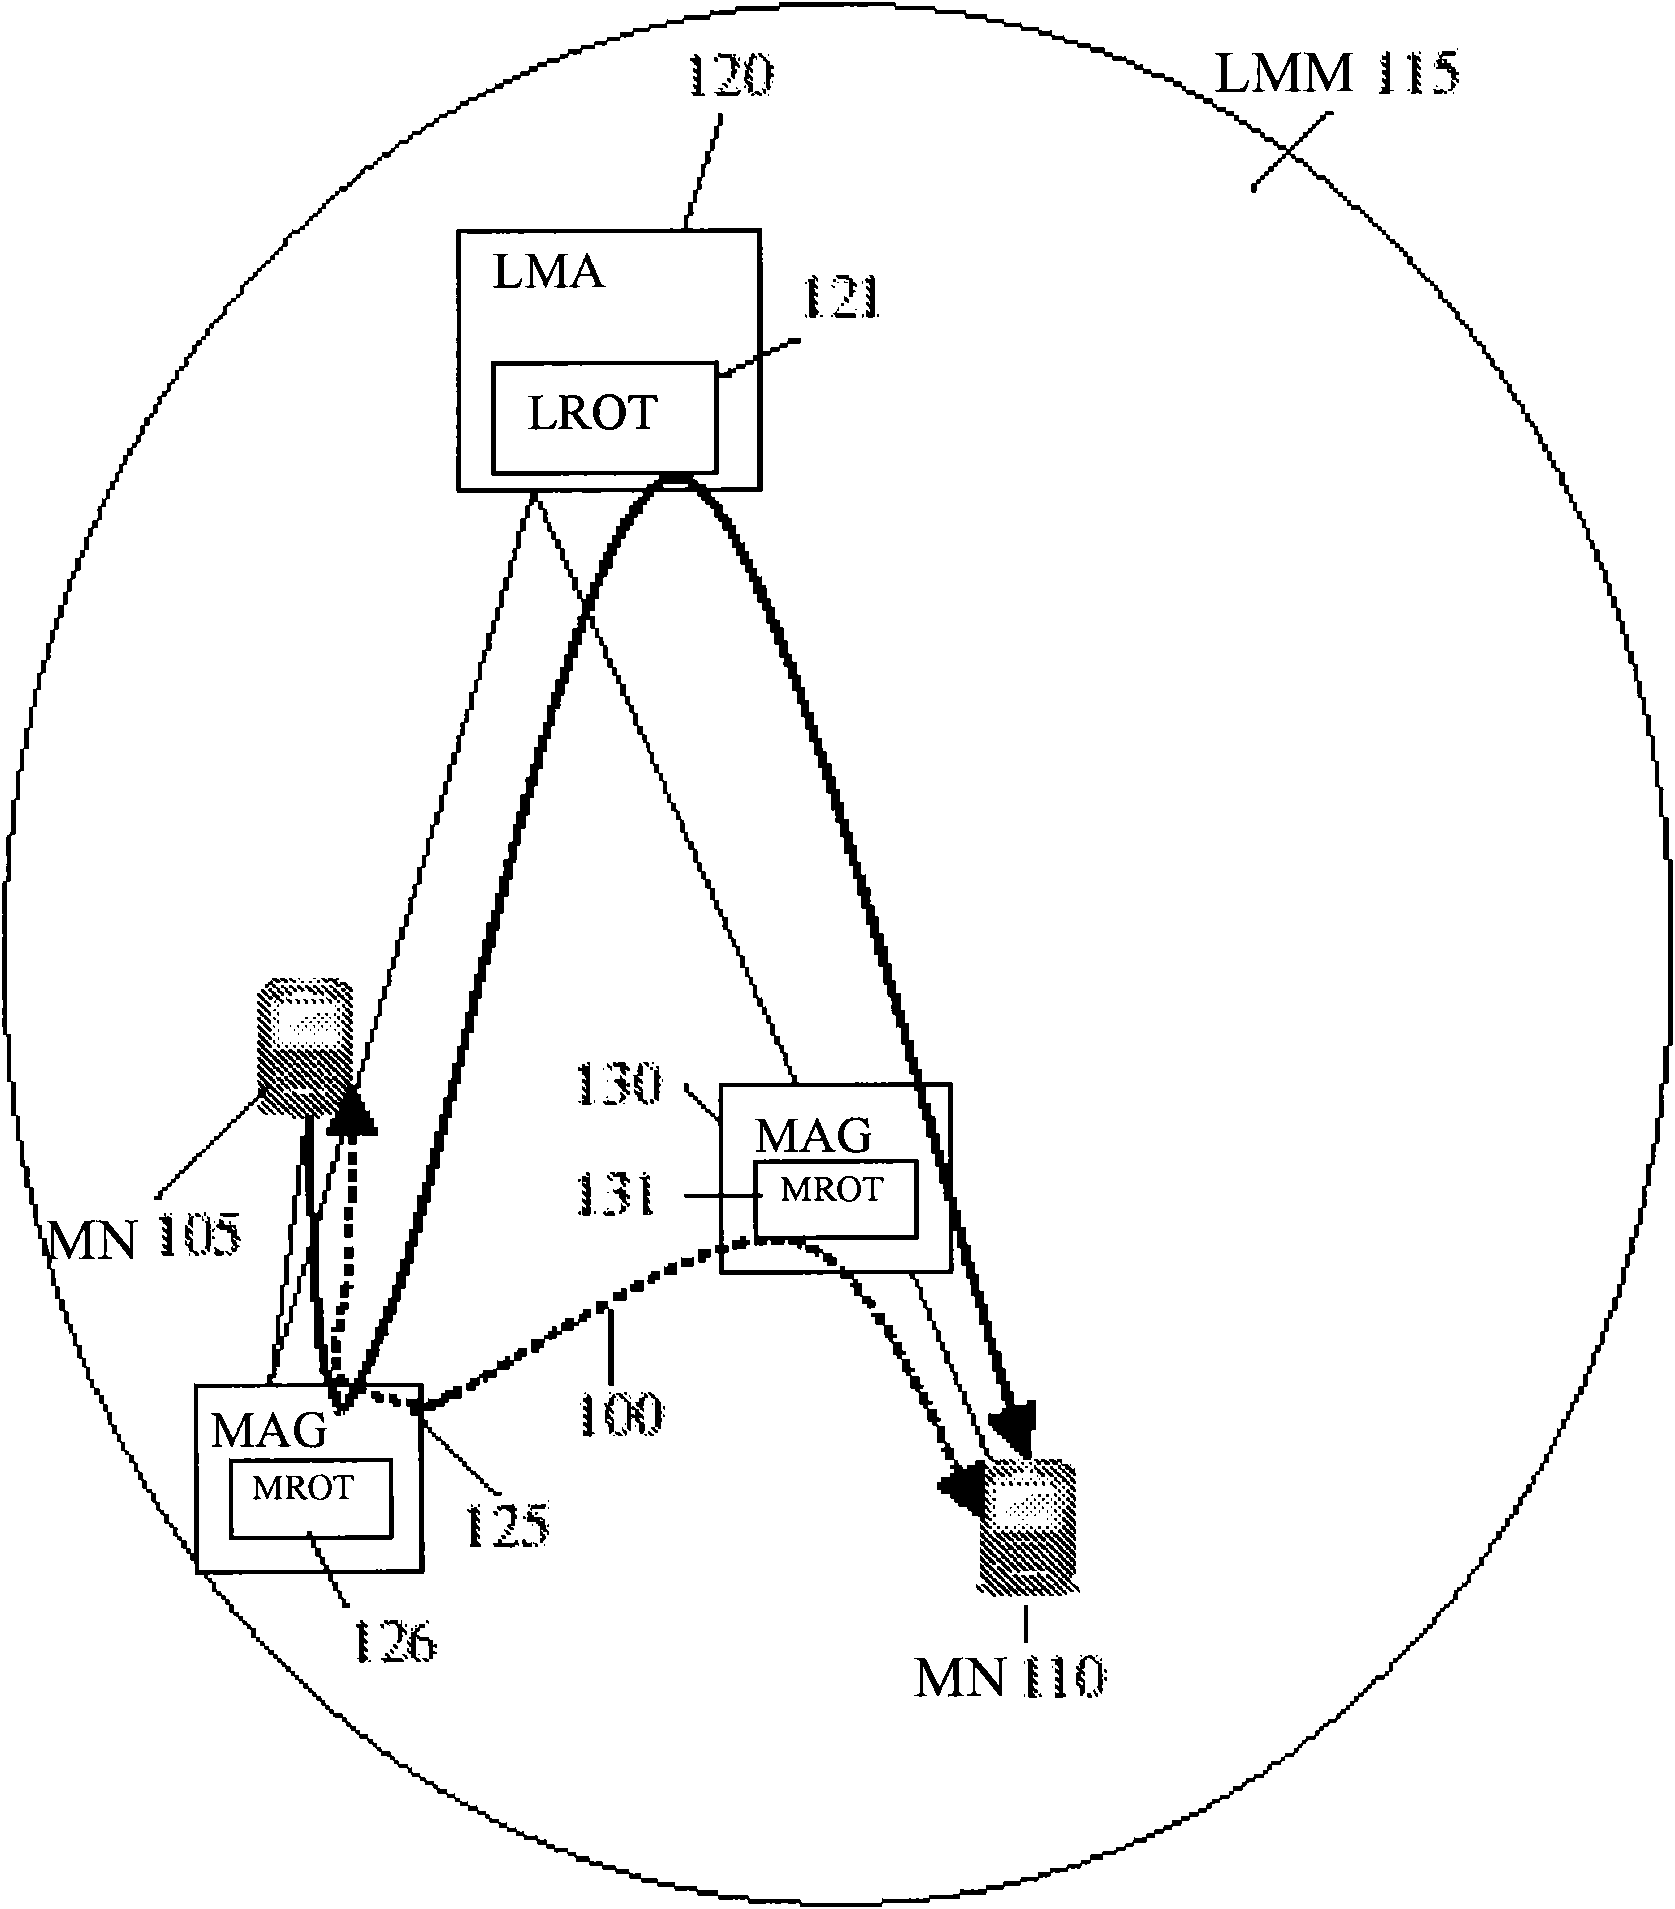 A method and an apparatus for providing route optimisation